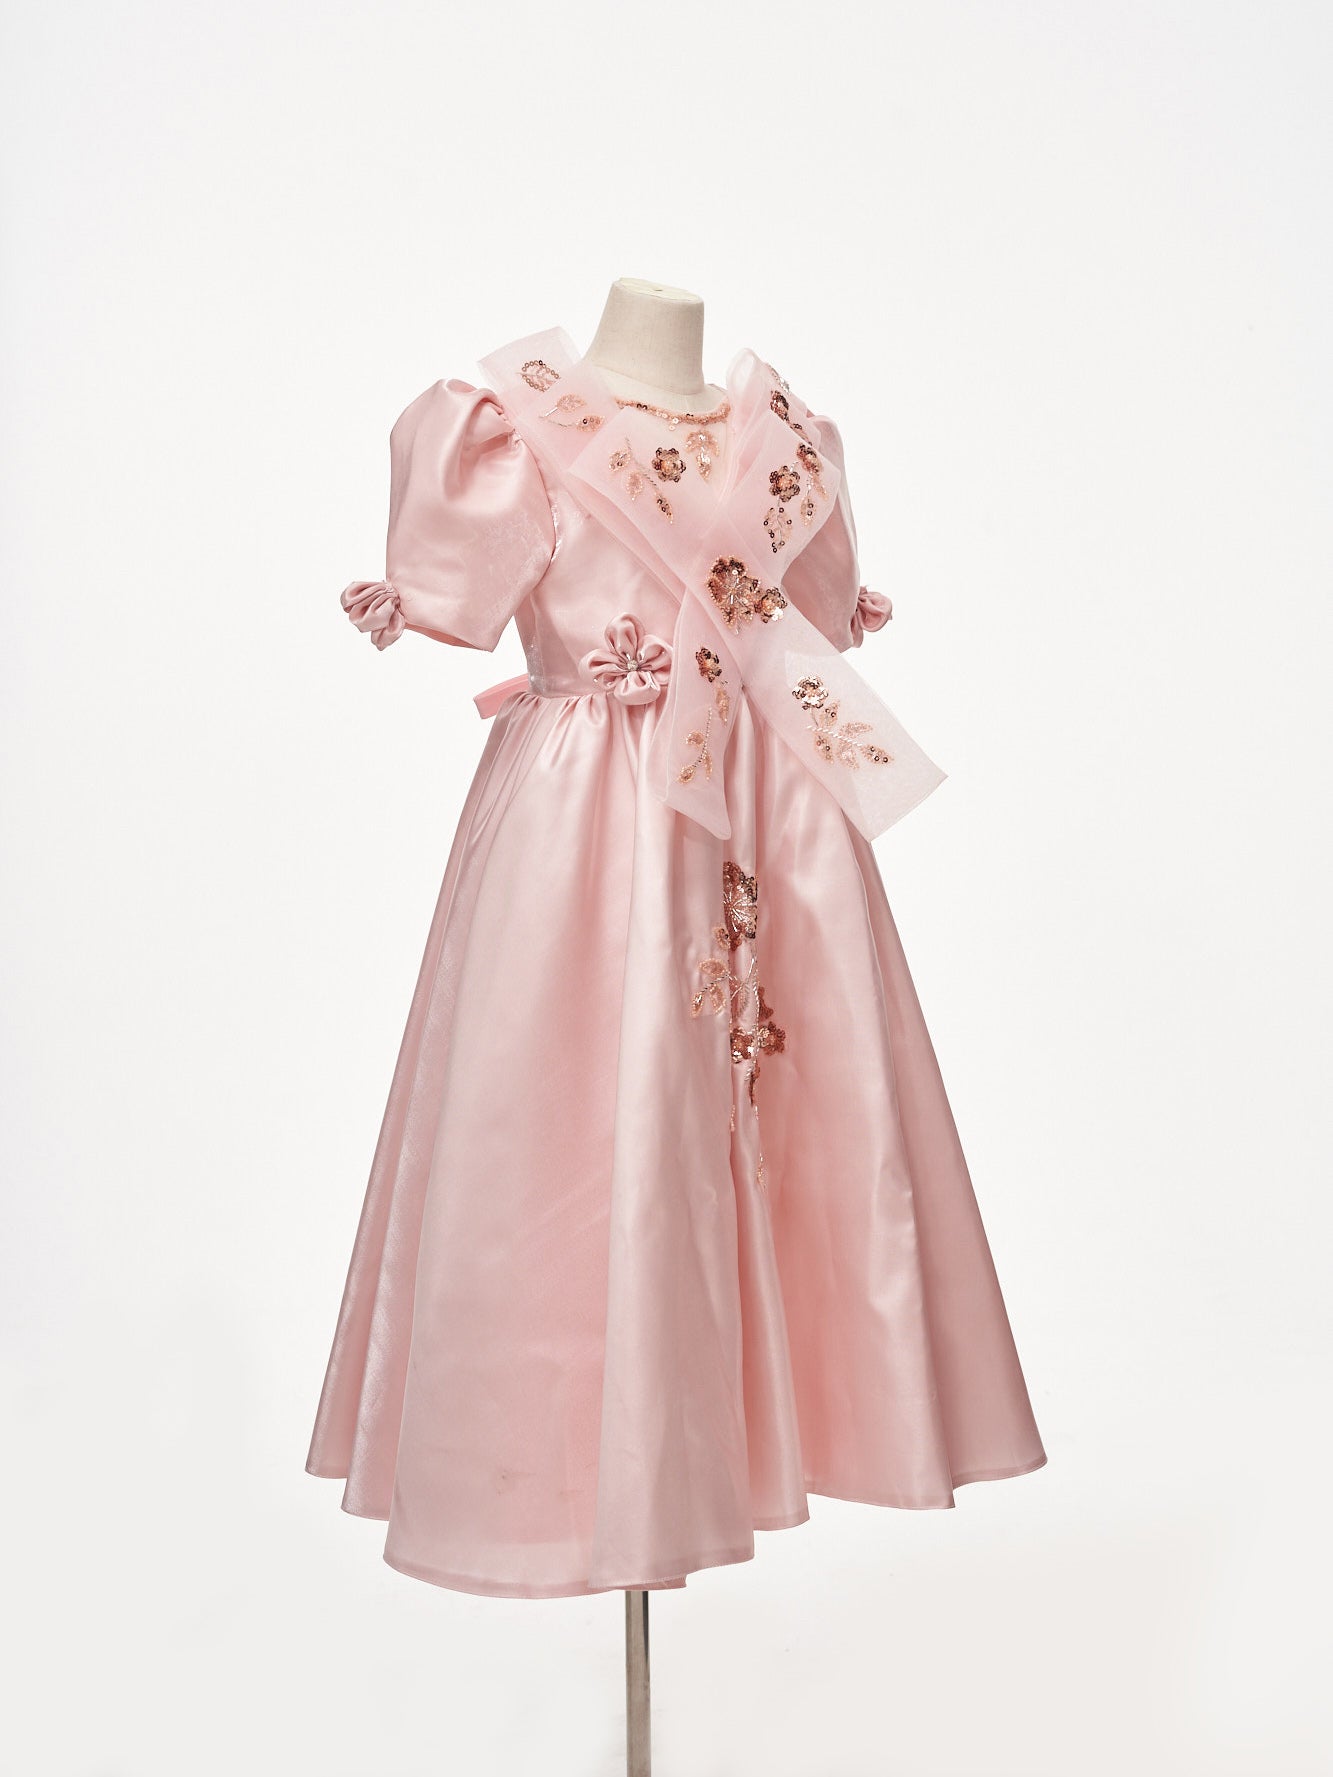 Kate Silk Organza Embroidery Princess Kids Dress for Photography